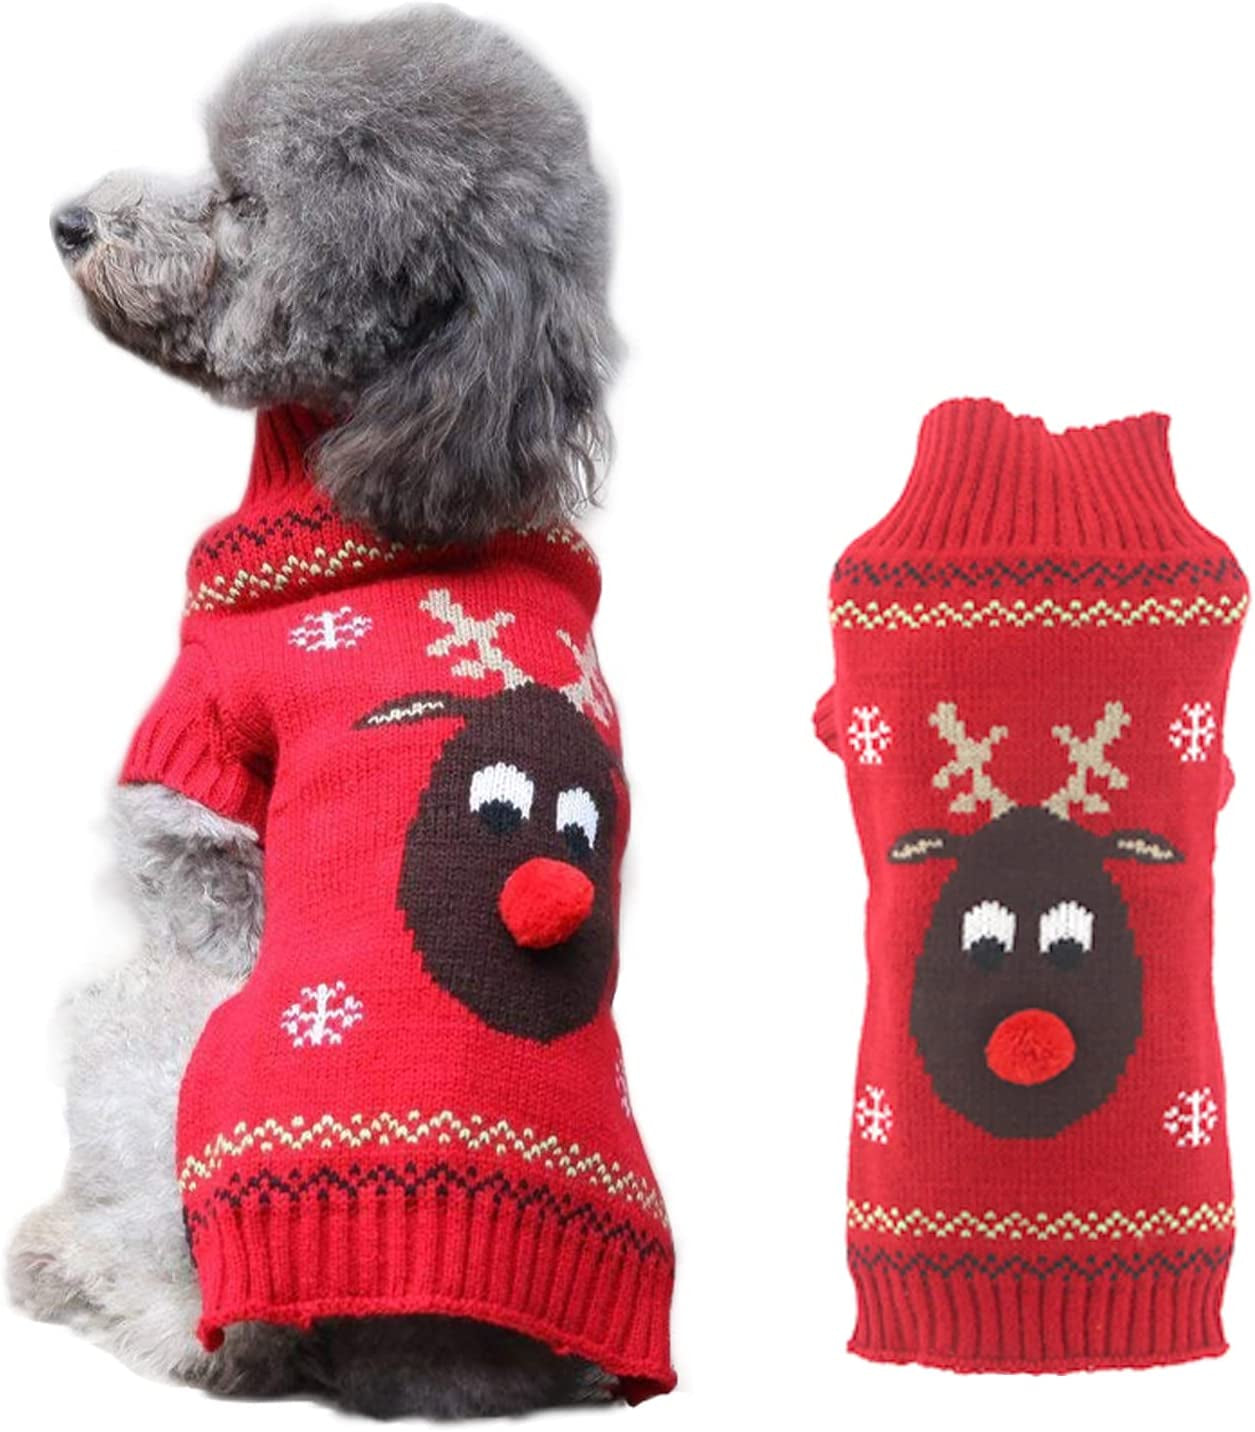 TENGZHI Dog Christmas Sweater Ugly Xmas Puppy Clothes Costume Warm Knitted Cat Outfit Jumper Cute Reindeer Pet Clothing for Small Medium Large Dogs Cats（S,Black） Animals & Pet Supplies > Pet Supplies > Dog Supplies > Dog Apparel Yi Wu Shi Teng Zhi Dian Zi Shang Wu You Xian Gong Si Red Reindeer XX-Small 